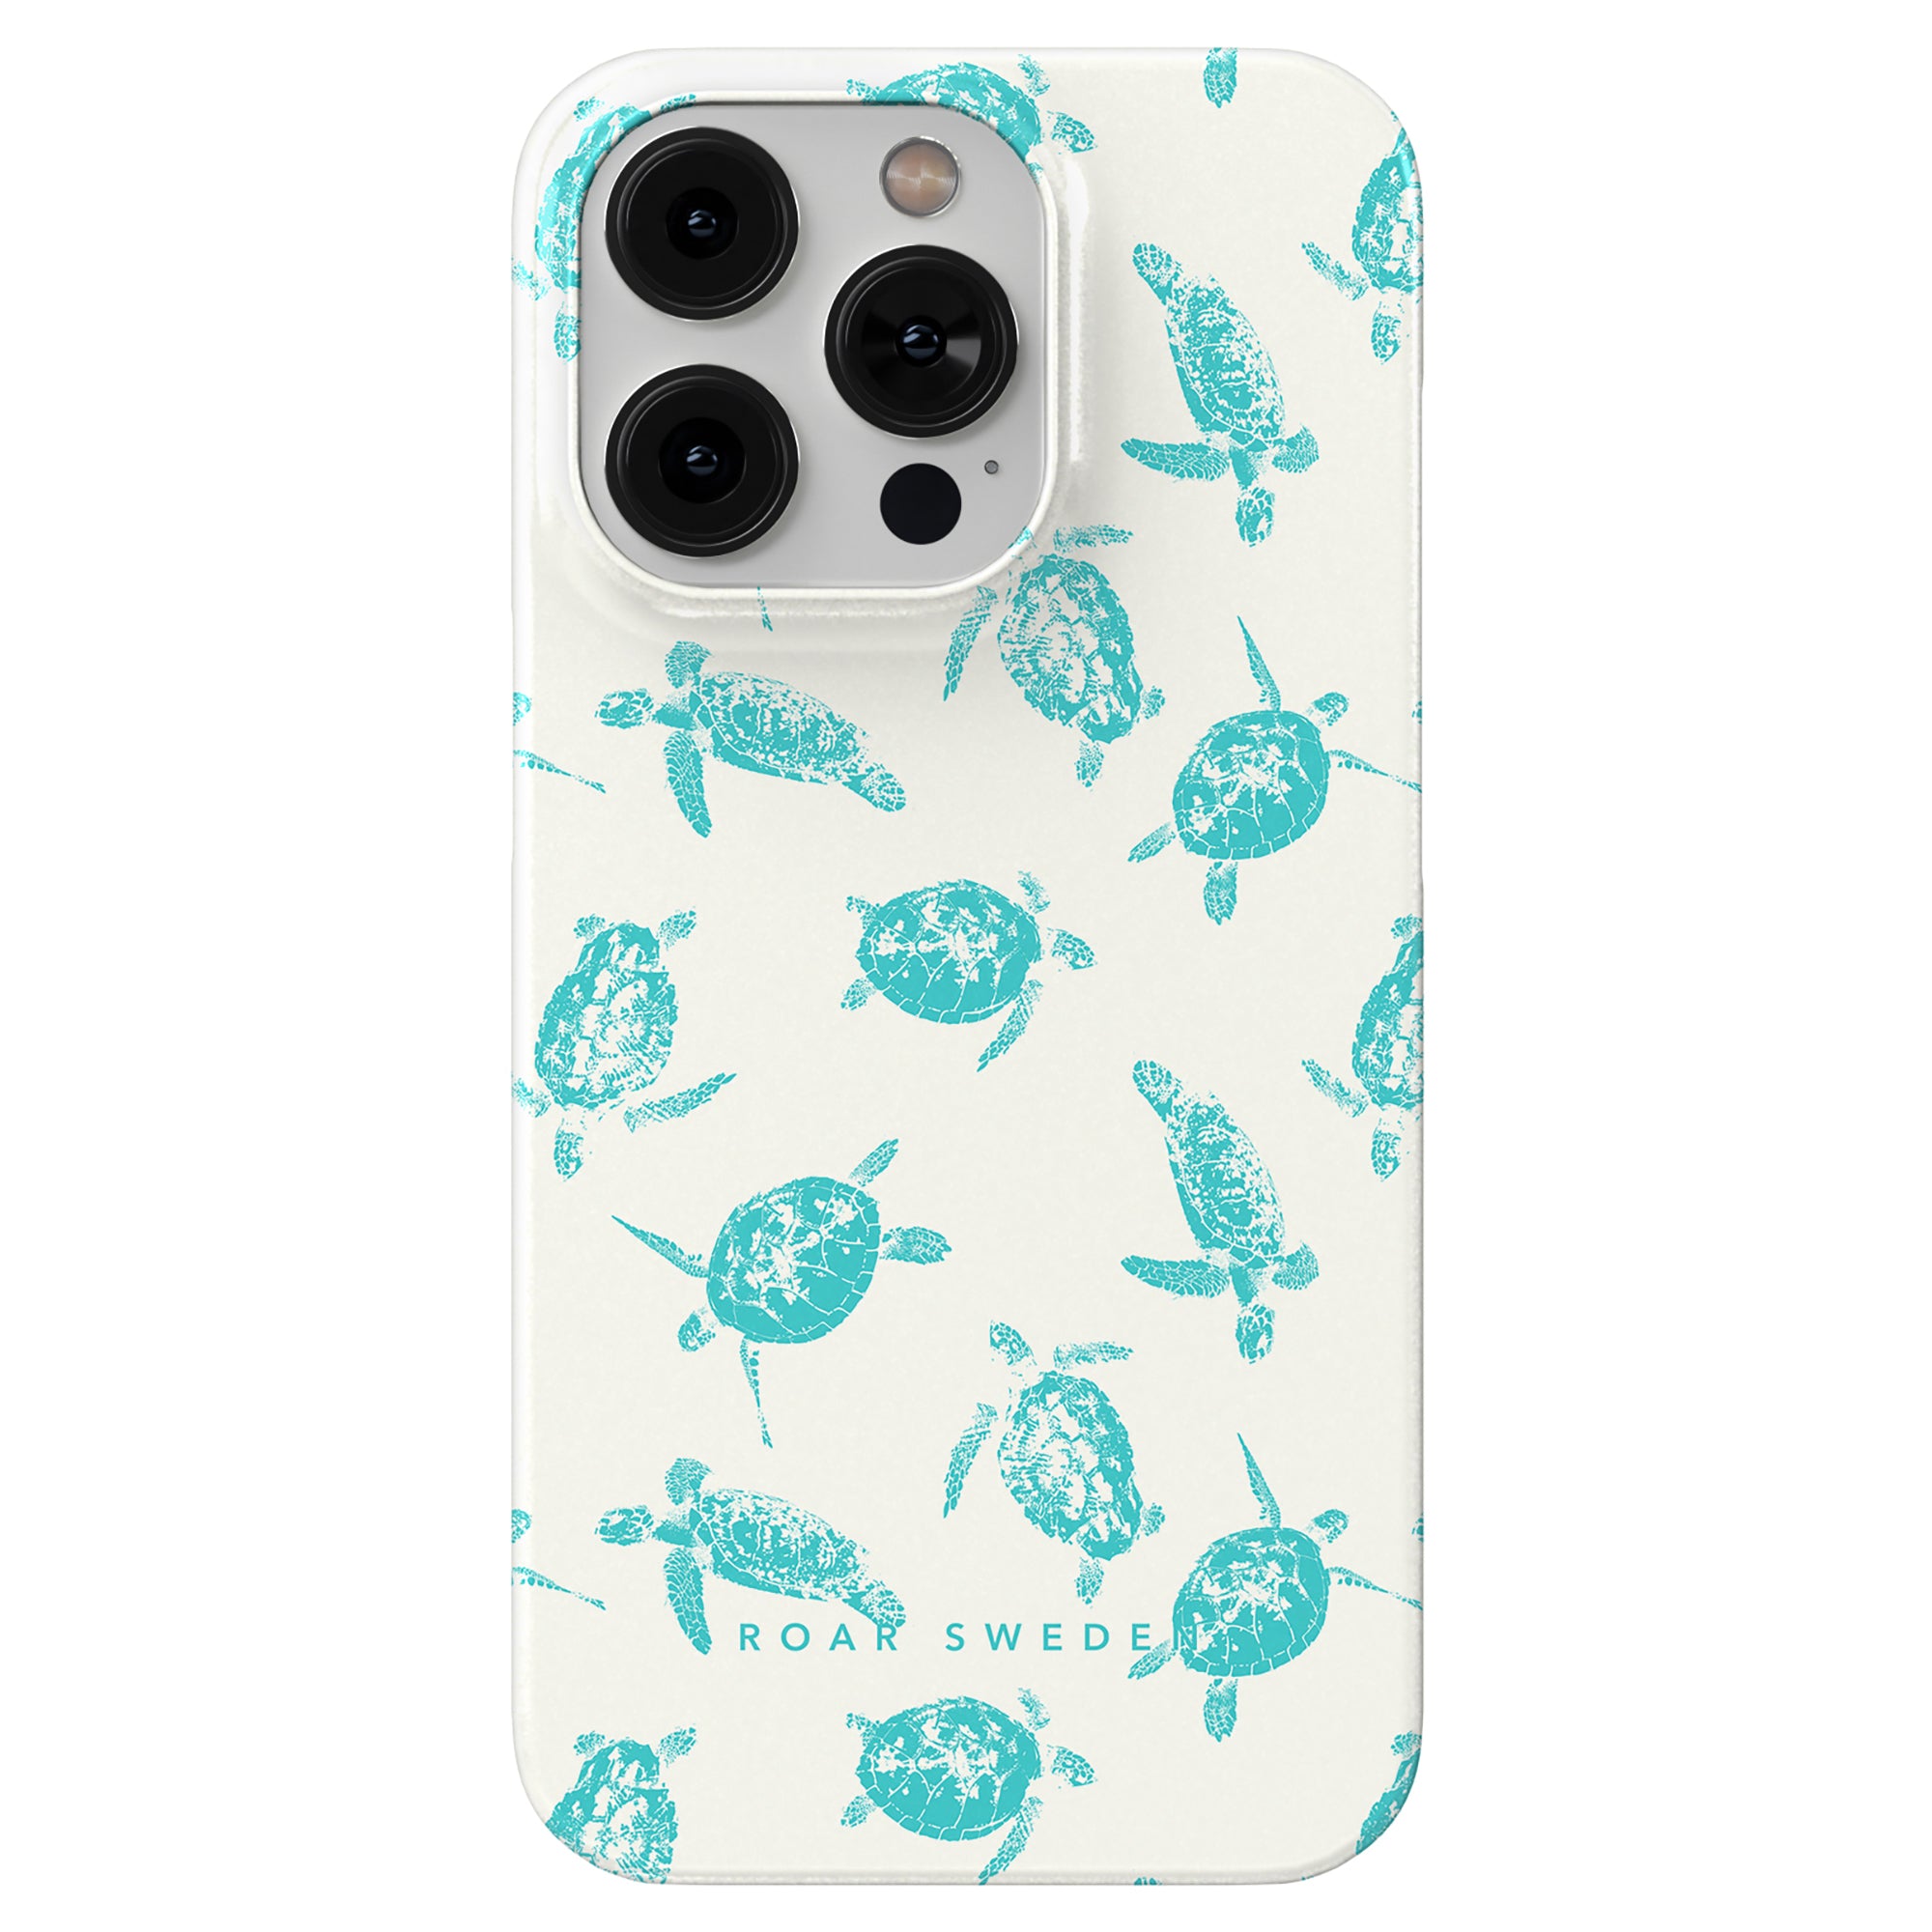 A smartphone with a Sea Turtles - Slim case, dual cameras, and featuring a case with nourishing ingredients.